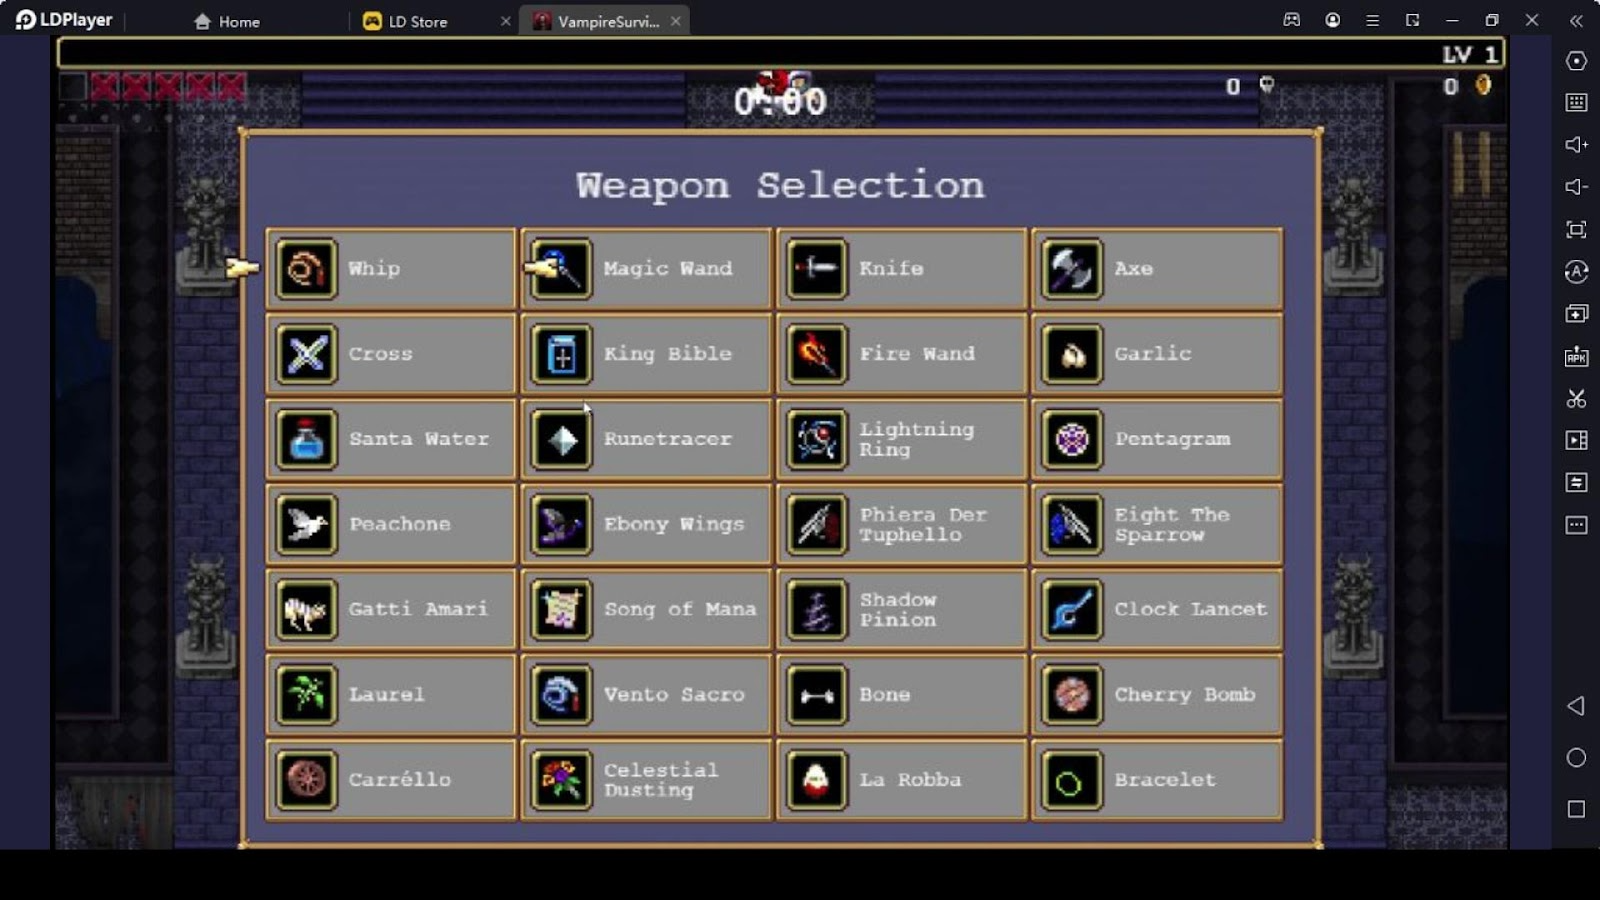 Choose the Best Weapons and Skills